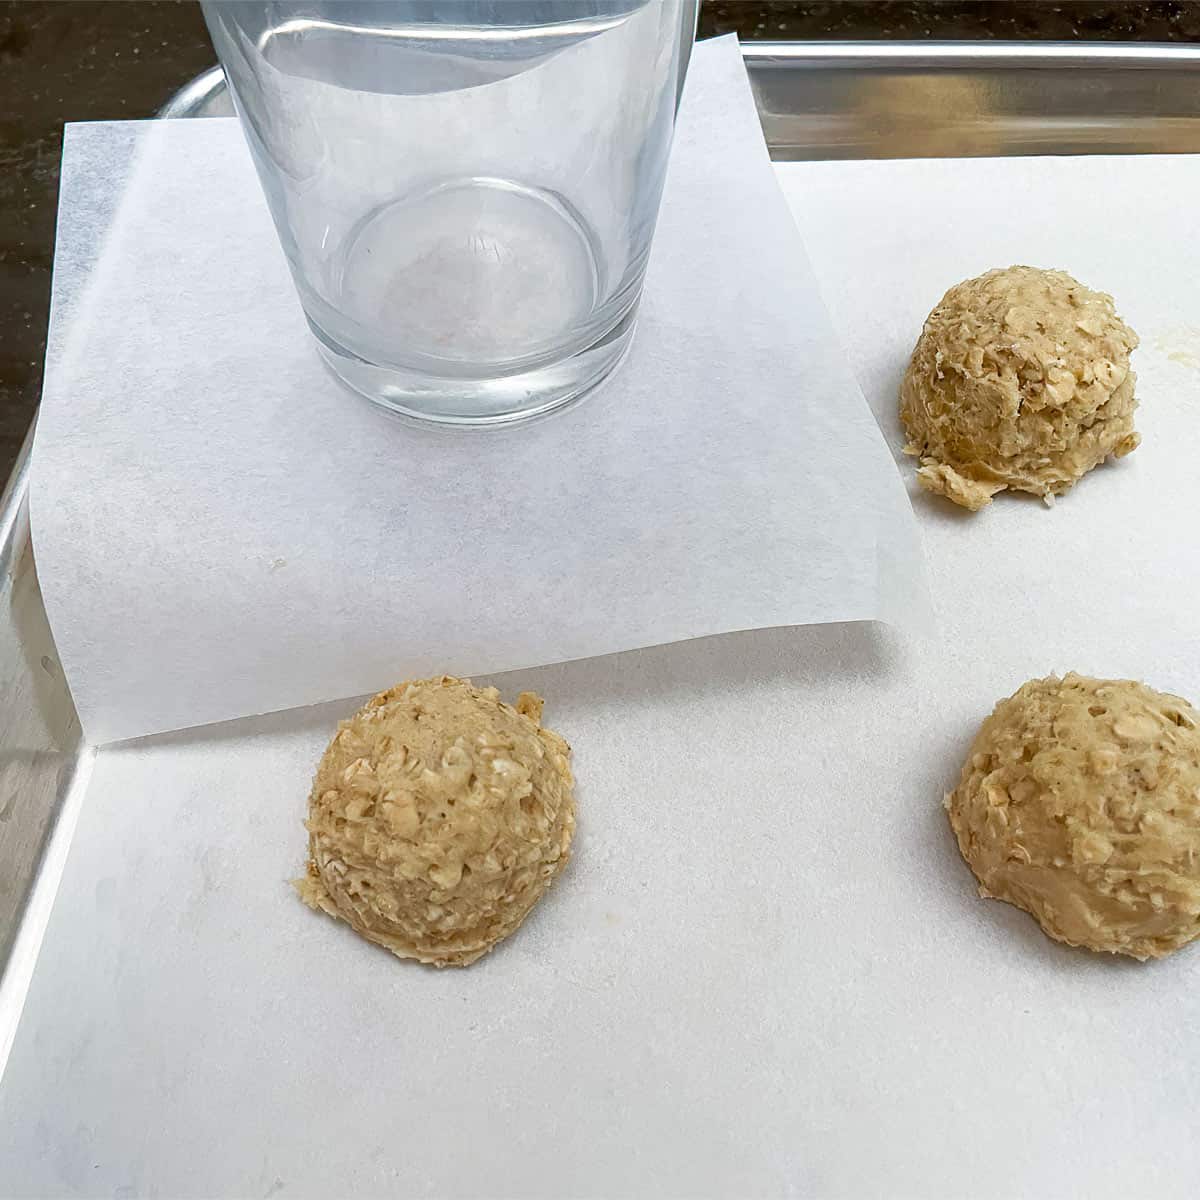 Using a square piece of parchment paper between cookie mound and the bottom of the glass to flatten mounds.